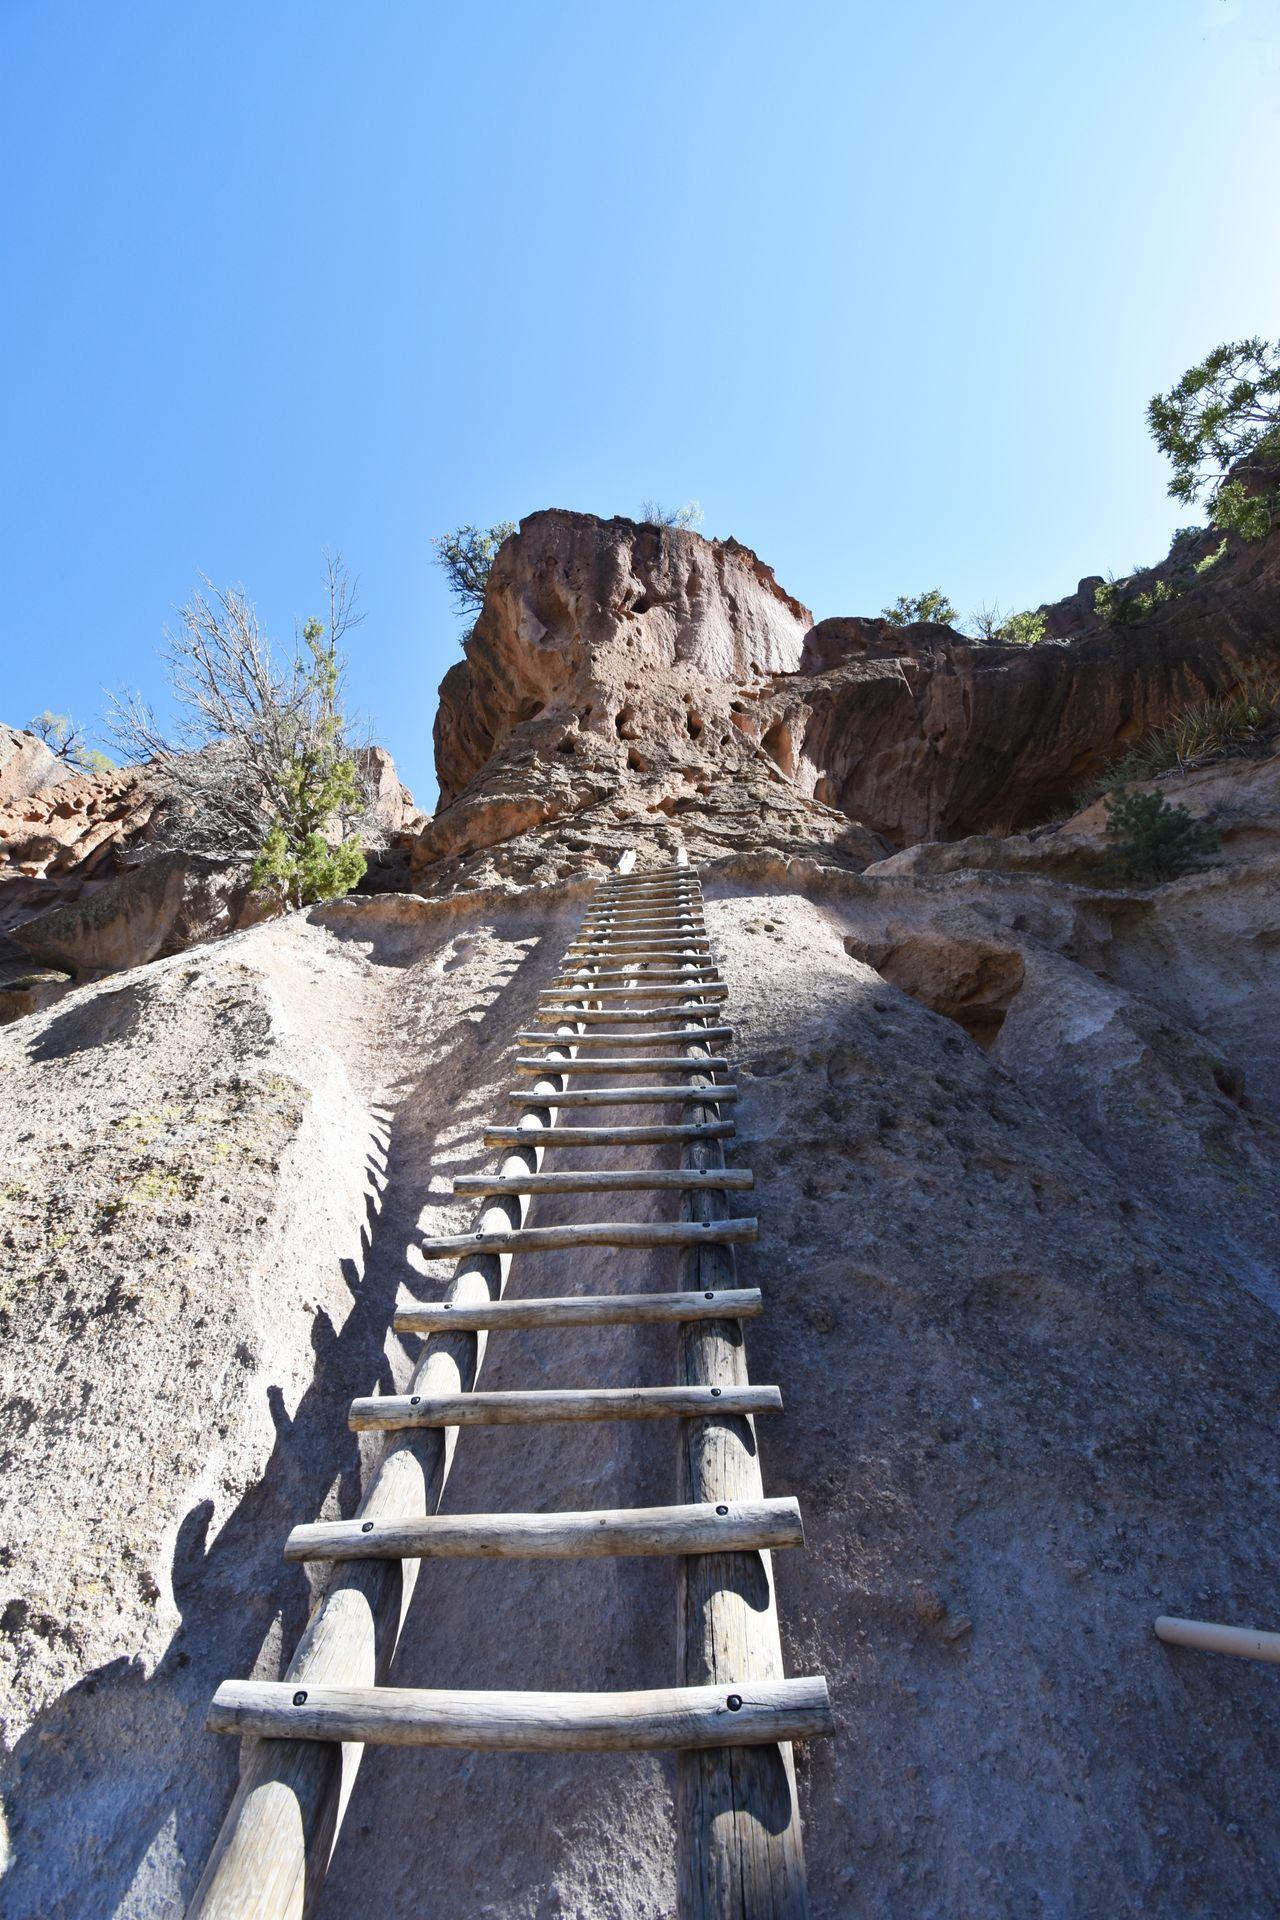 A long ladder leading up to the Alcove House at Bandelier National Monument.